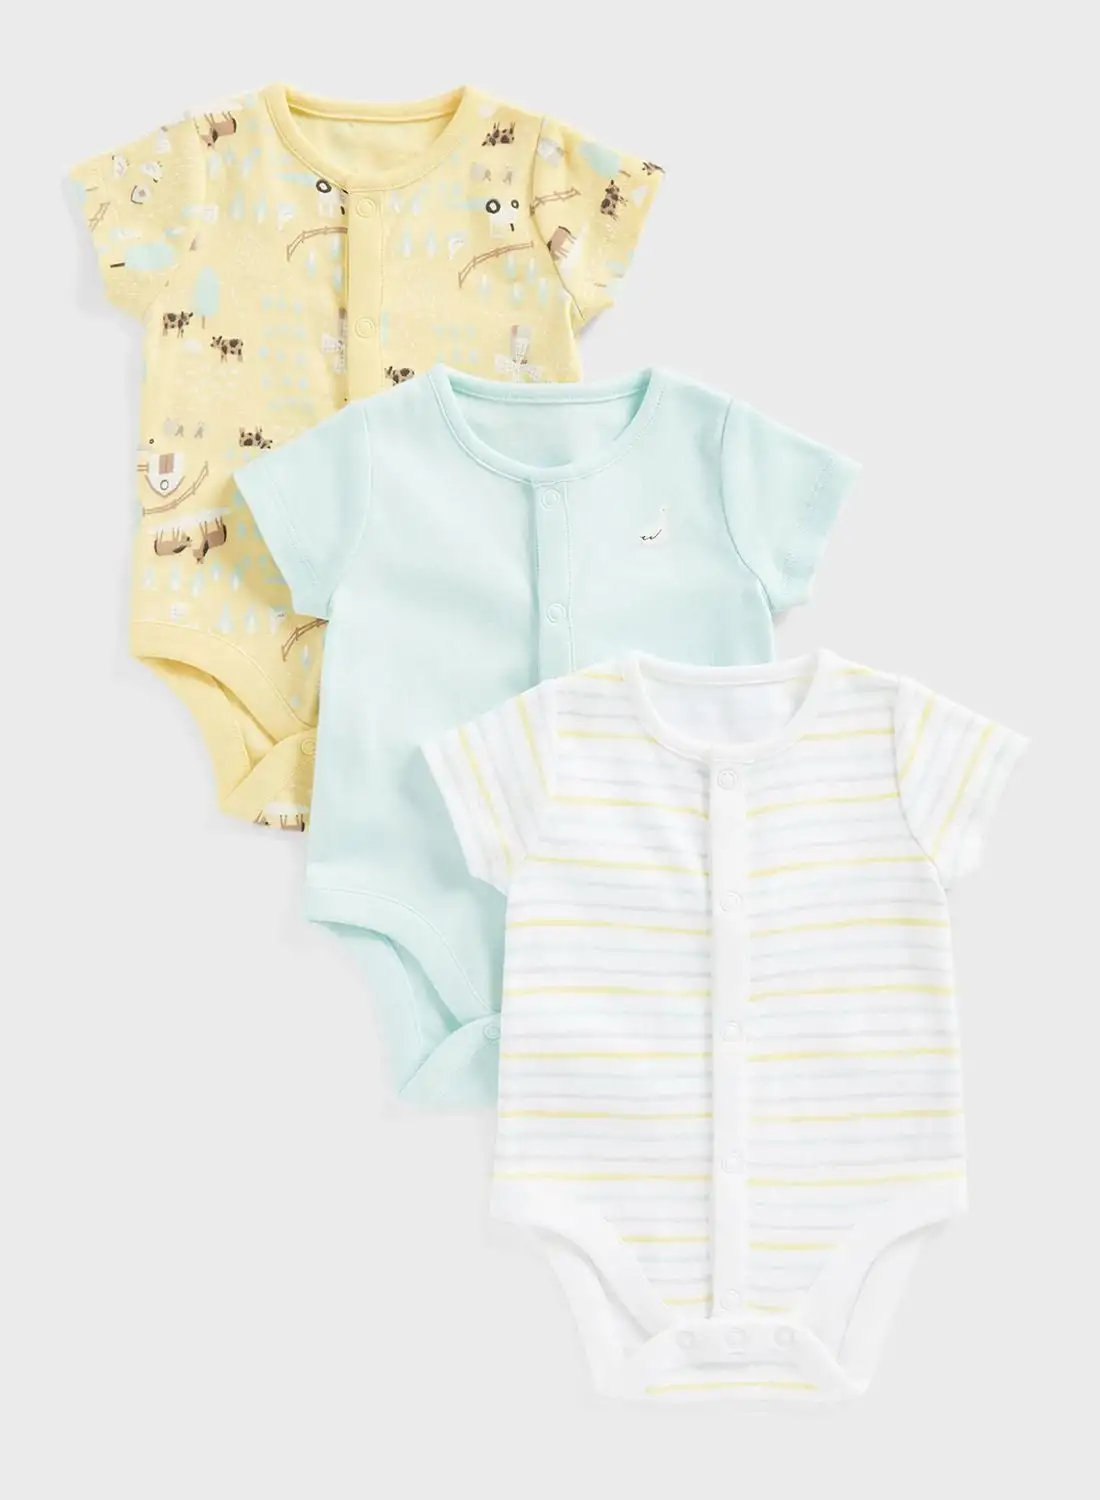 mothercare Infant 3 Pack Assorted Bodysuits